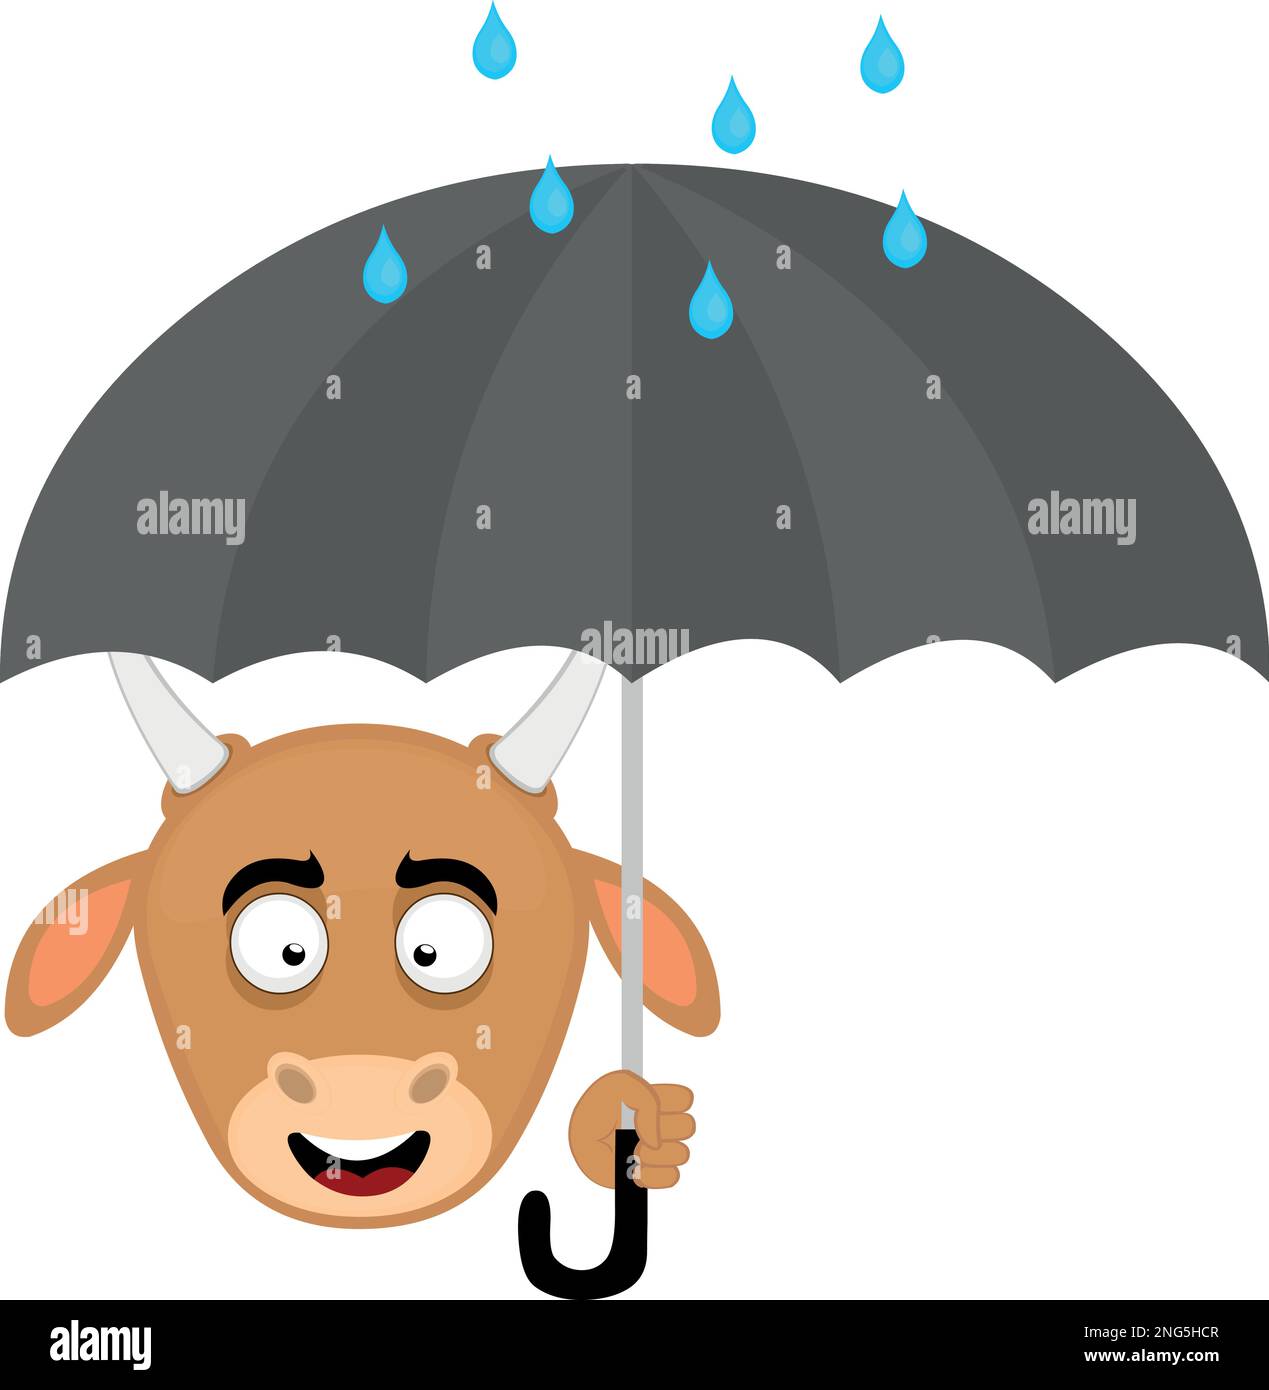 vector illustration face of a cartoon cow with an umbrella in hand and raindrops Stock Vector